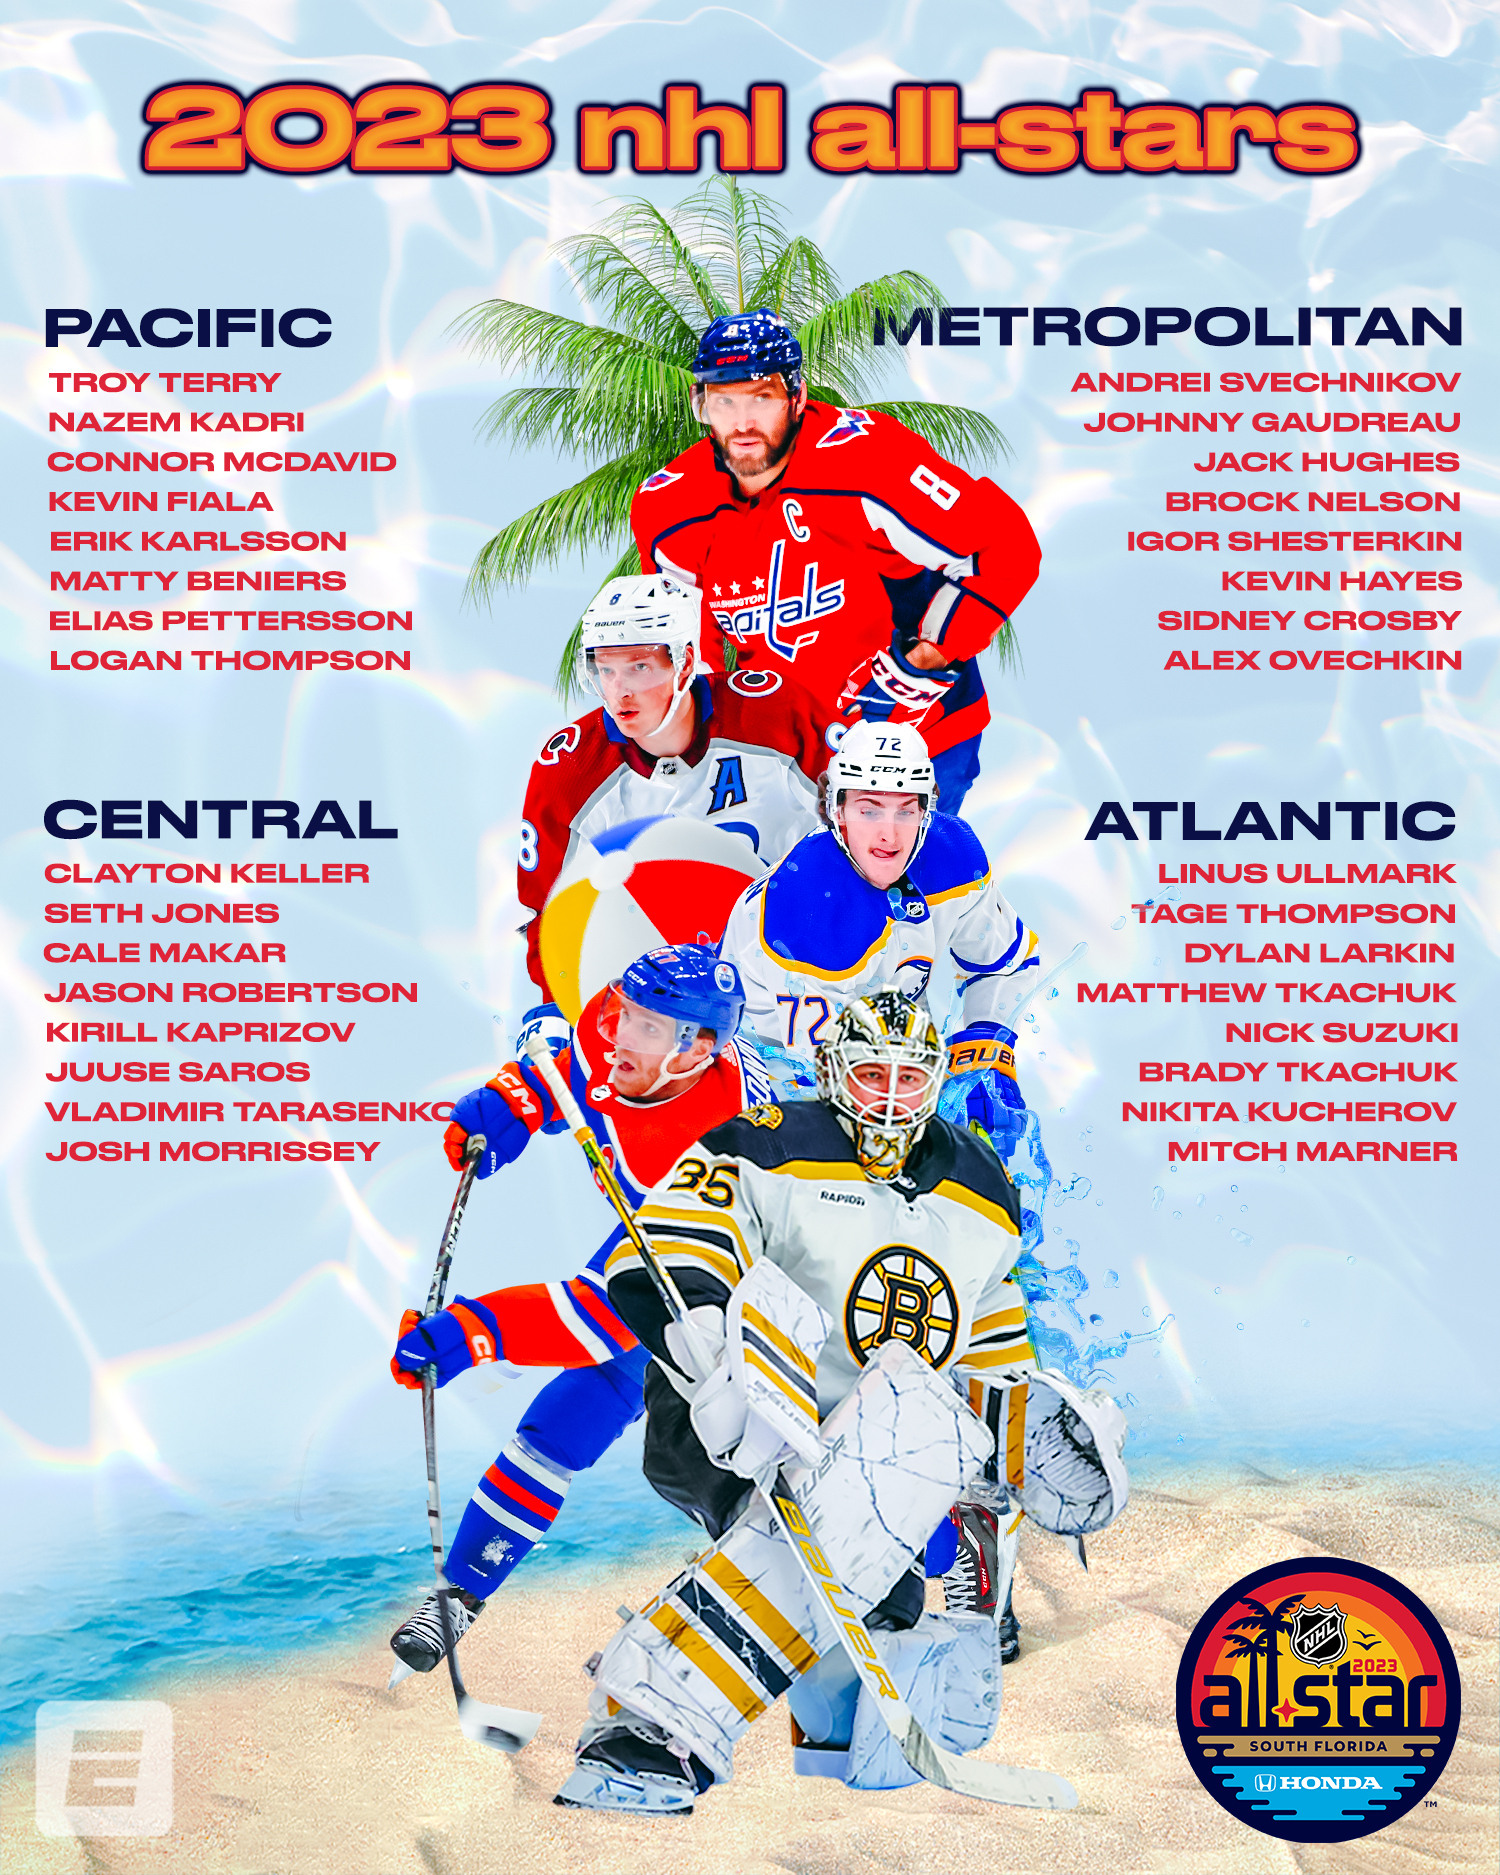 2023 NHL All-Star Game: Schedule, Location, Rosters, more - DraftKings  Network